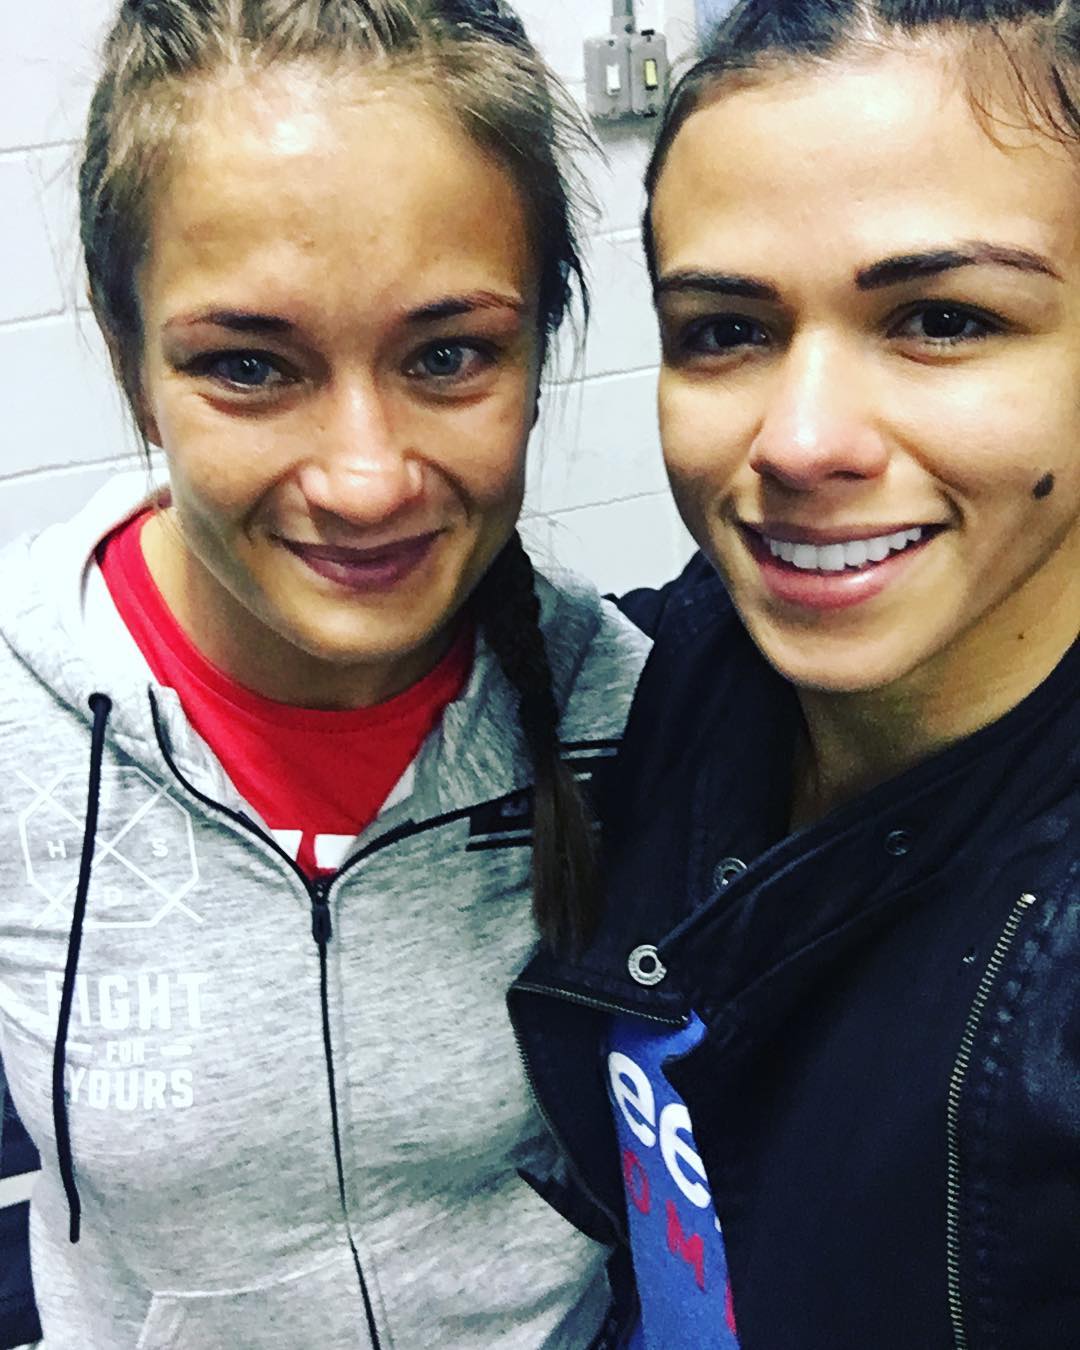 Claudia Gadelha IG Post - At the end of the day, when we fighters get old we will be able to talk to our grandchildre...